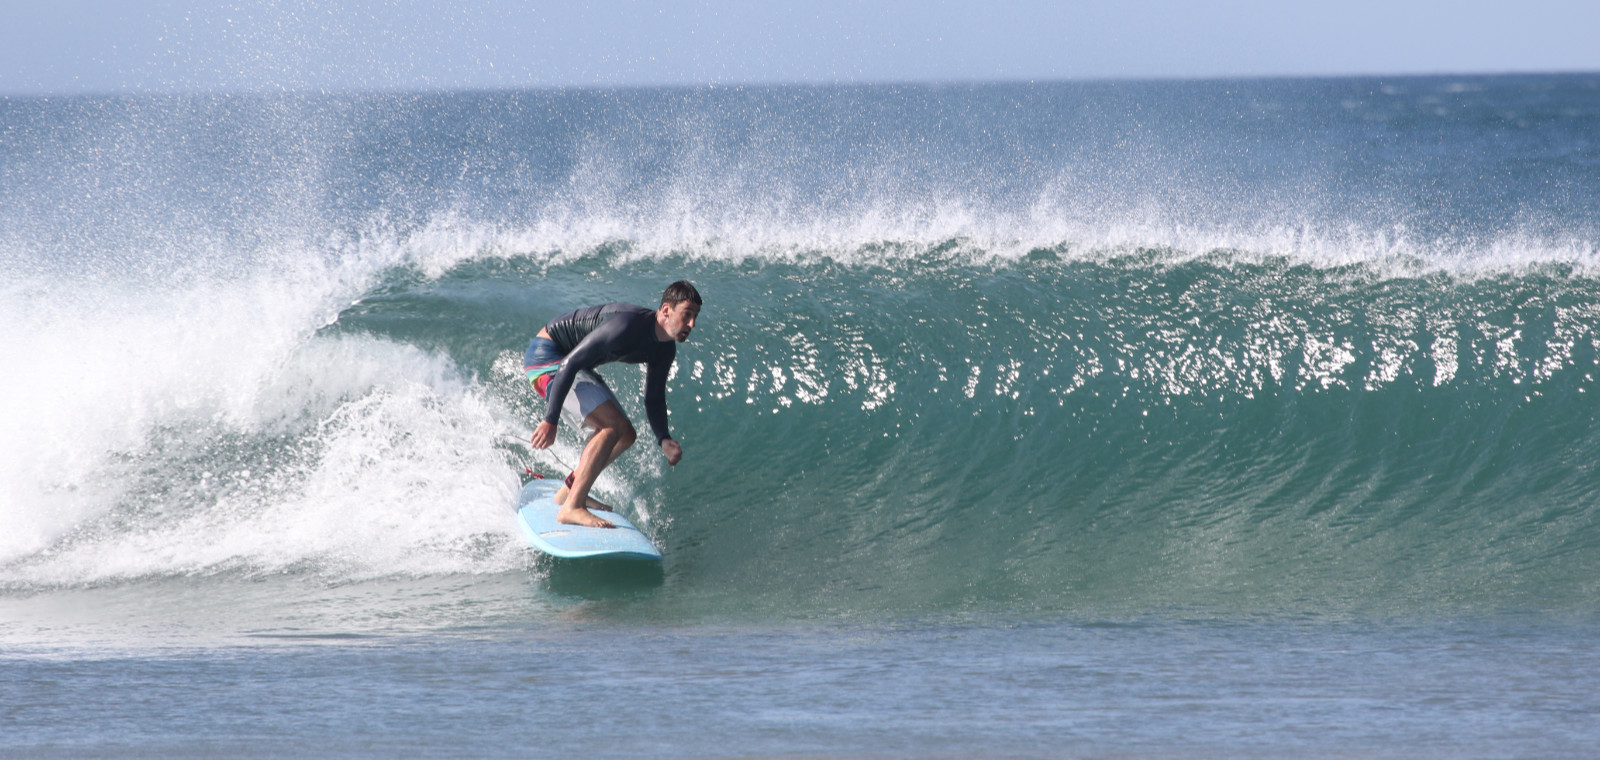 Micah spends a lot of time surfing in Costa Rica.